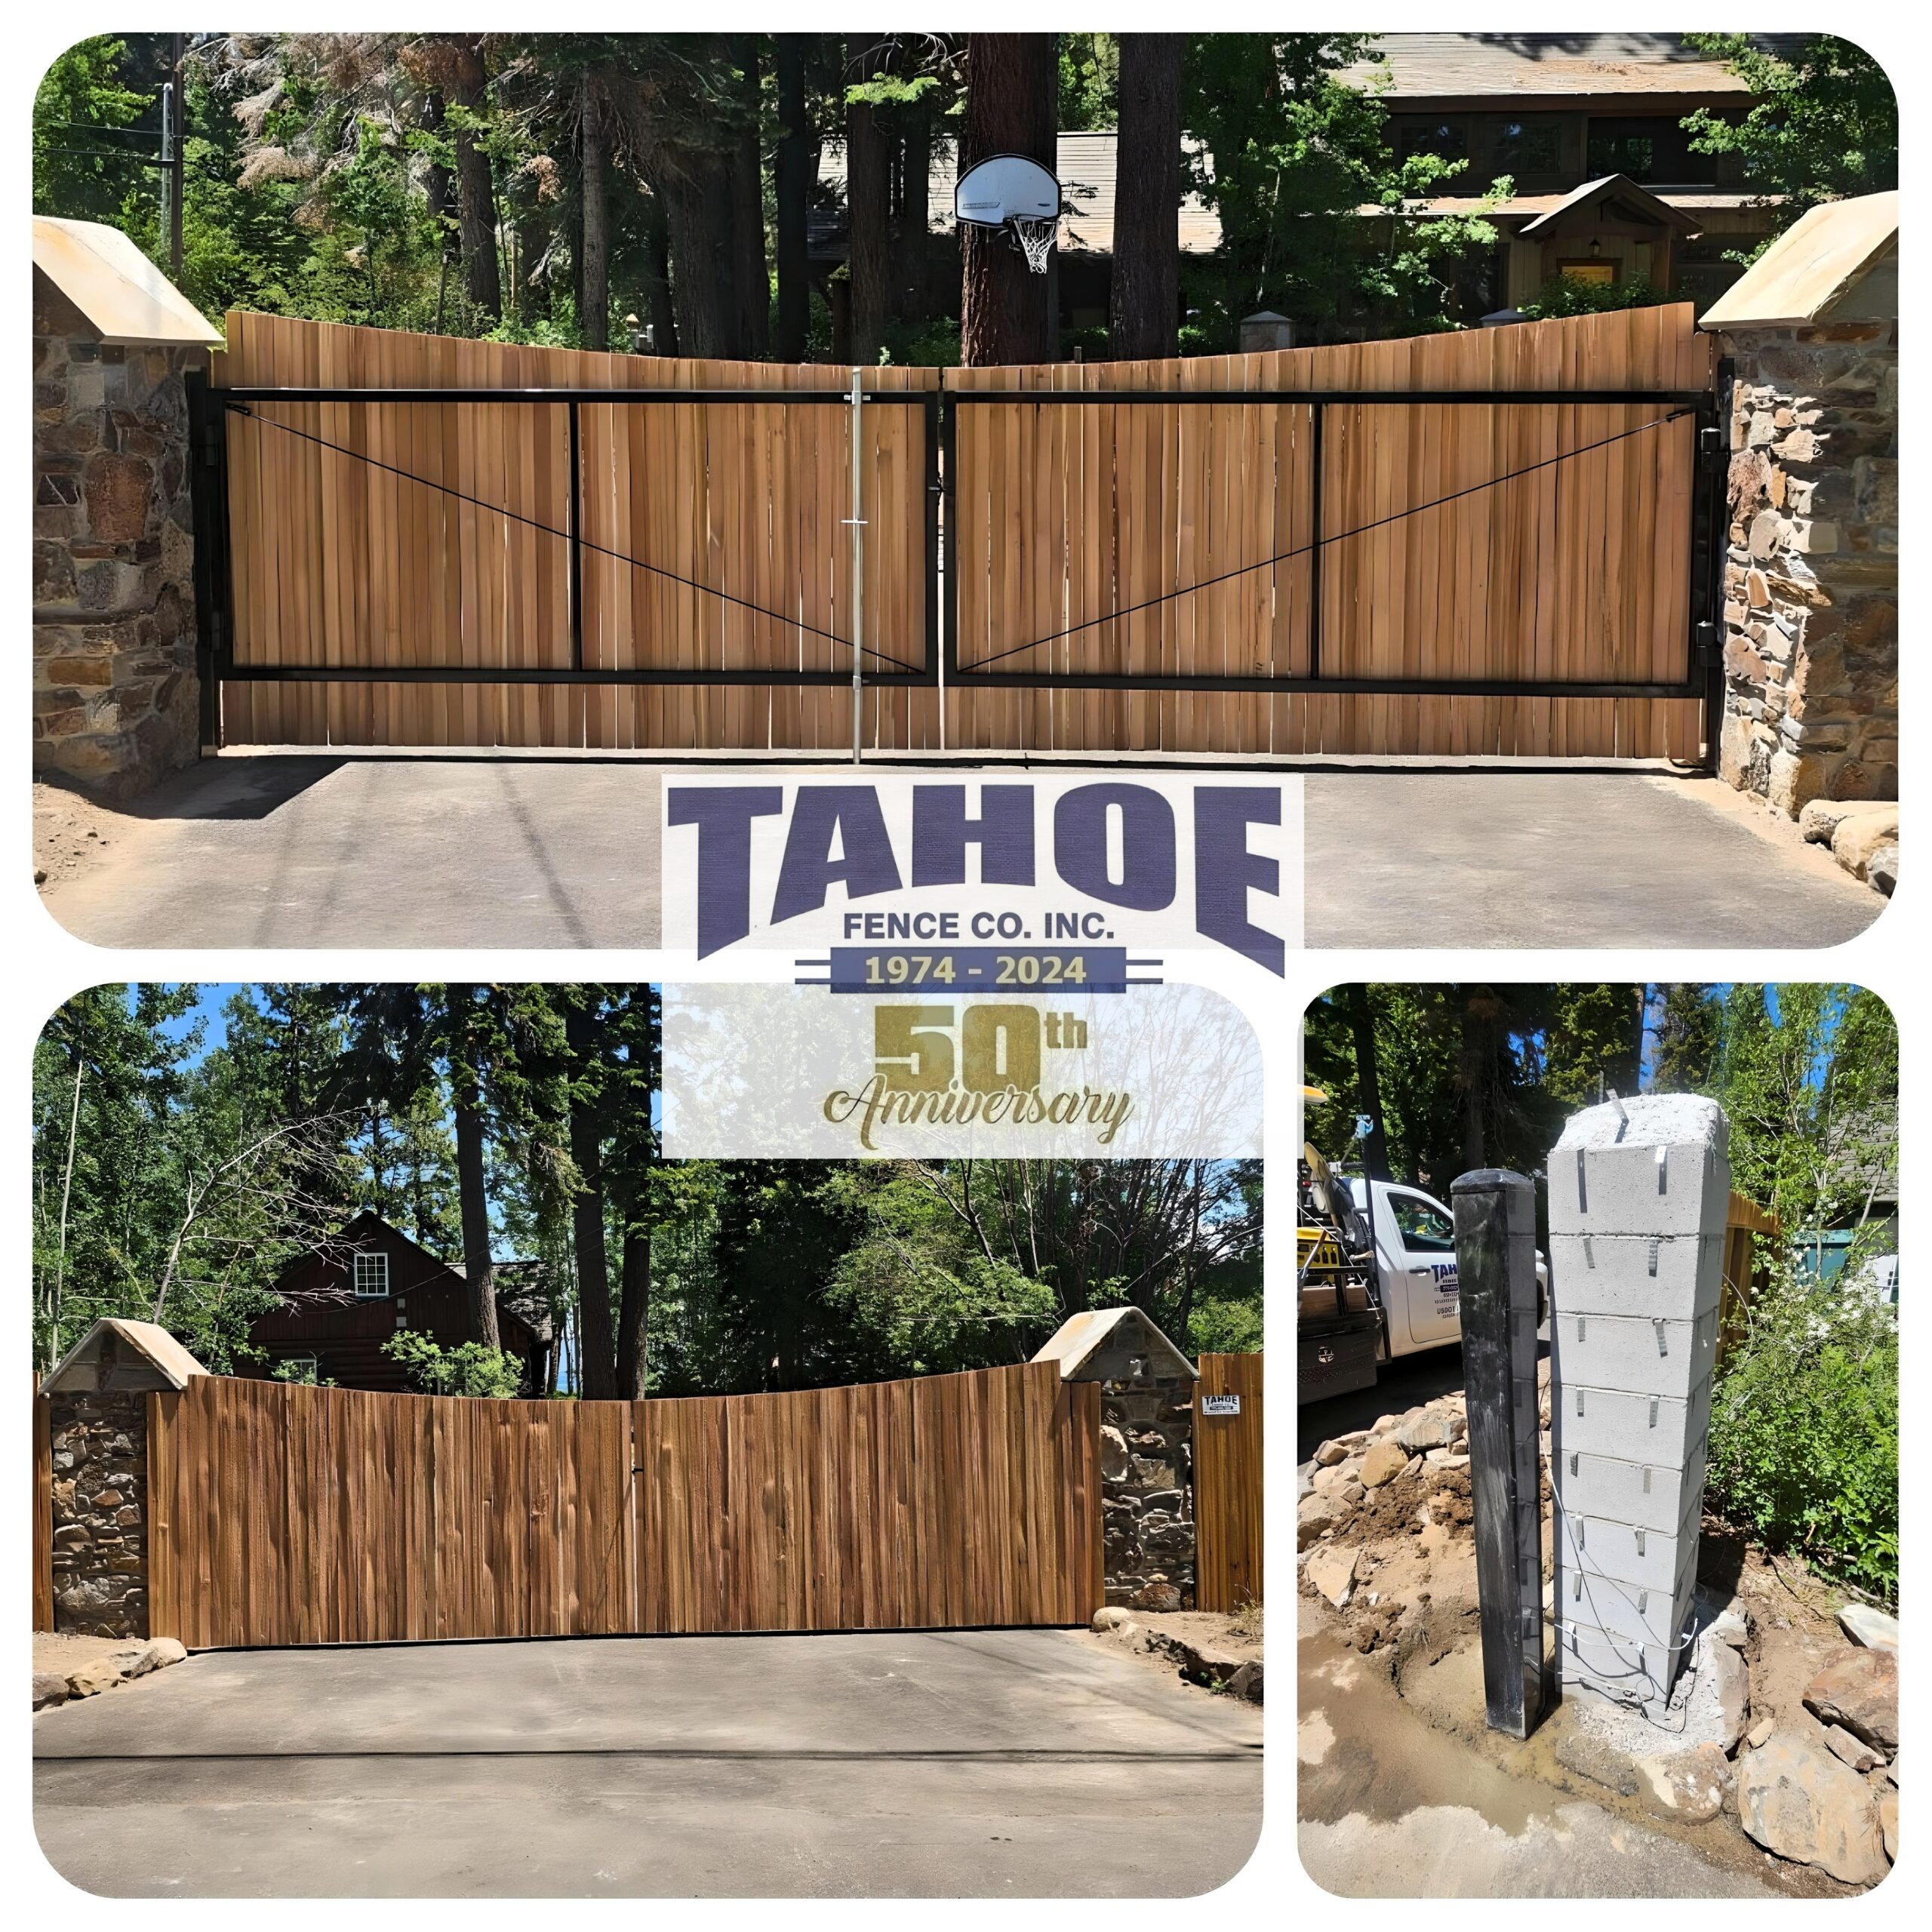 Summertime 

It's officially Summer, and Tahoe Fence is working hard to help you relax and enjoy it.

Whether you want to secure your backyard BBQs, or safeguard your pool parties, we've got the style to match your summertime fun.

Tahoe has been here 50-years helping to define your outdoor spaces, so you may enjoy the sunshine season with peace of mind.

Pictured: Tahoe's classic-style, grape stake wood fencing with metal frame gates and posts incorporated into rustic stone columns in Homewood (Placer County.)

Special thanks to Hawk and Son Enterprises Inc. for working with us on the awesome retro Tahoe stone columns. They always do outstanding work!